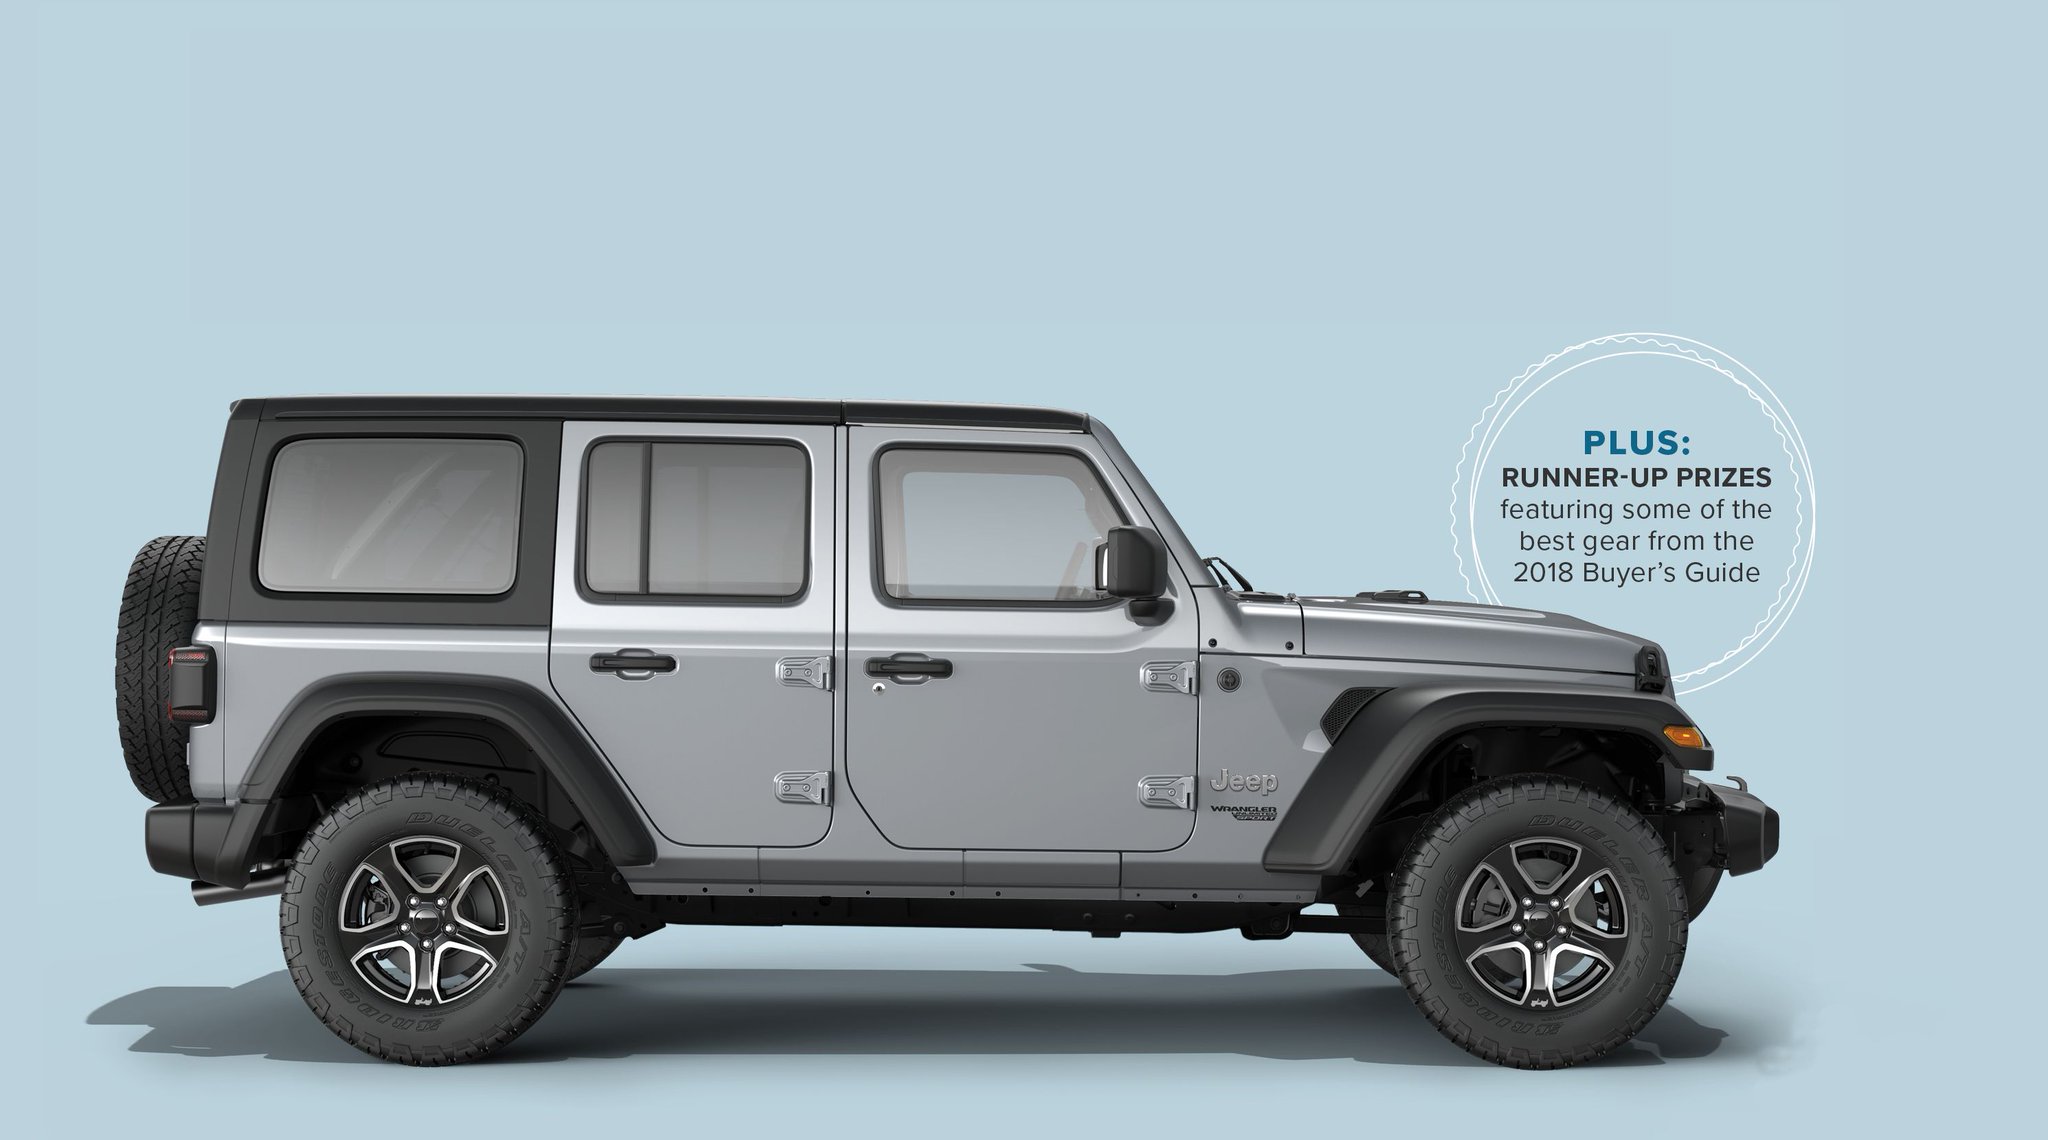 Outside on X: Promo: Enter to win an All-New 2018 @Jeep Wrangler loaded  with award-winning Gear of the Year products from our Summer Buyer's Guide!    / X